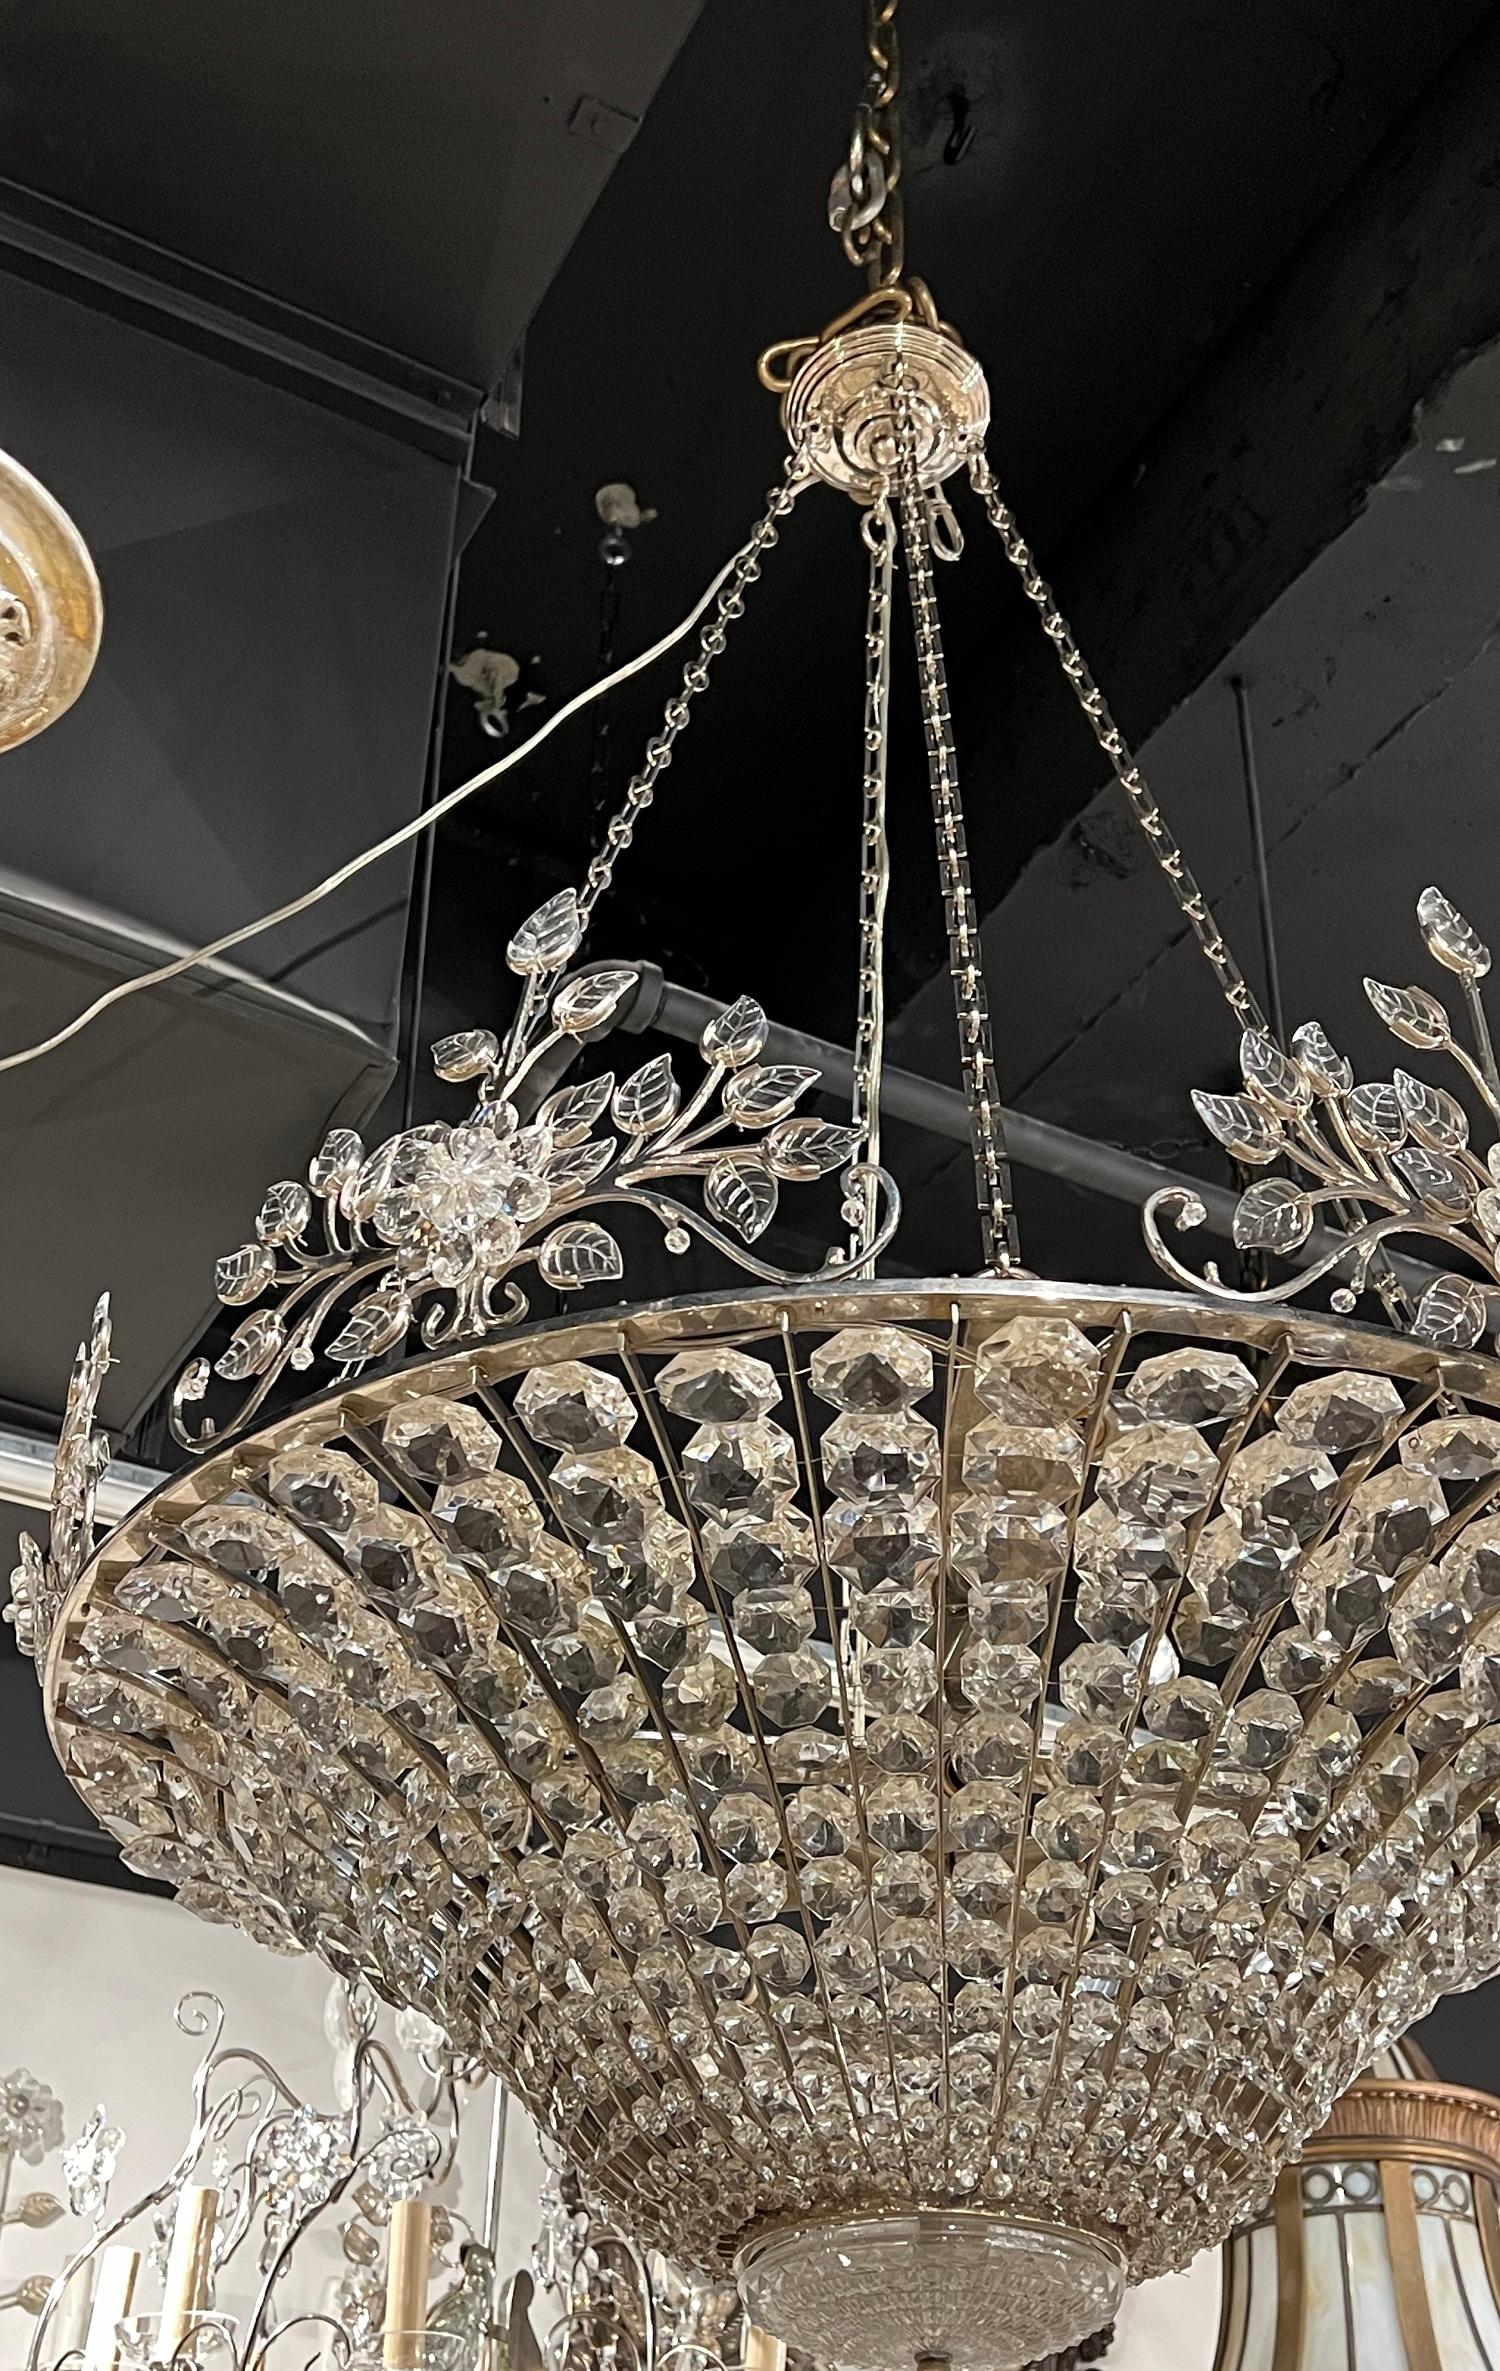 A French silver plated chandelier with crystals and 10 interior lights, circa 1940s. In very good vintage condition.

Dealer: G302YP